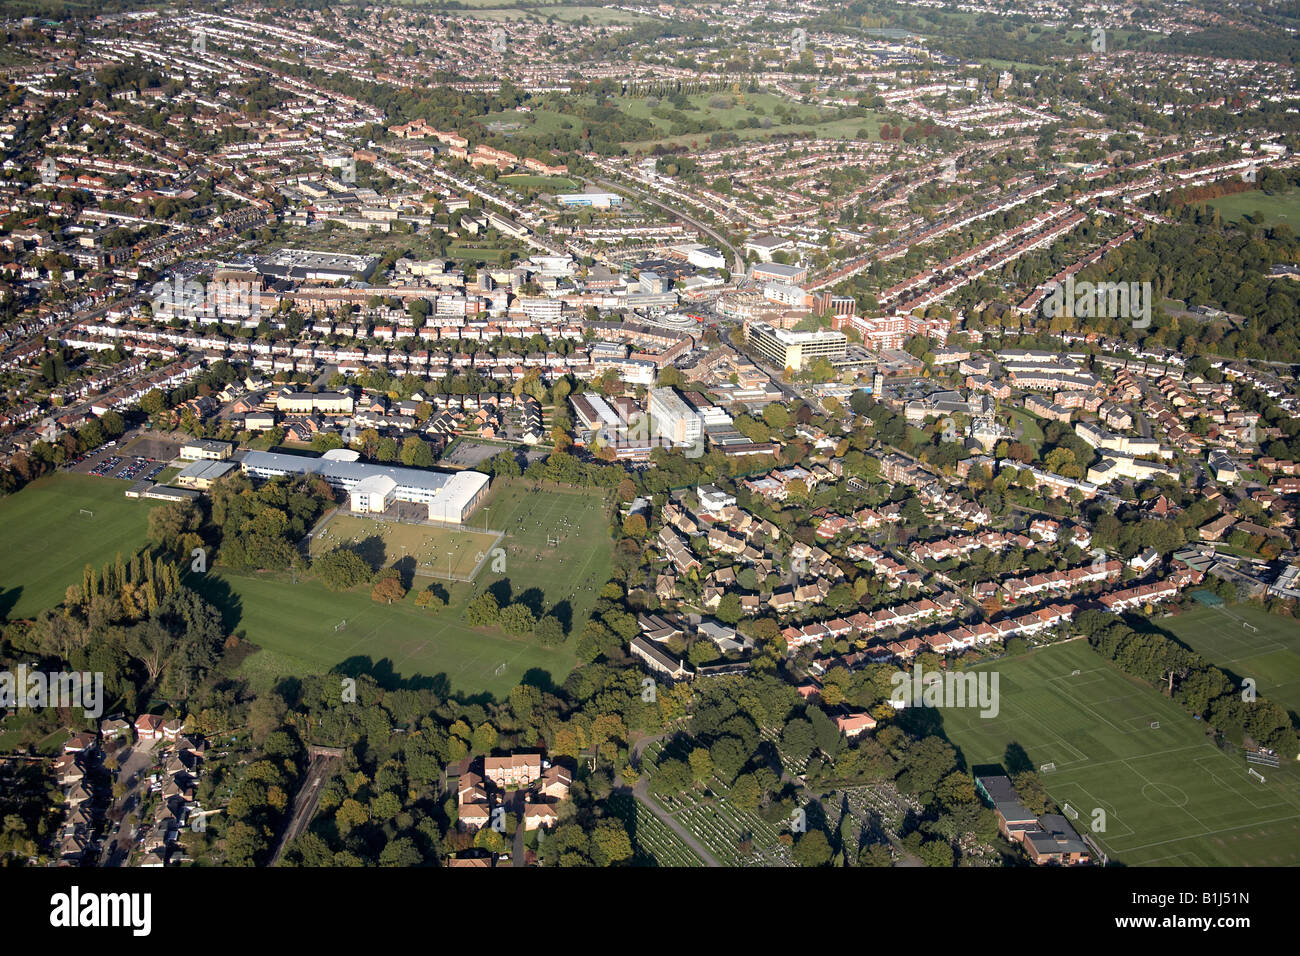 Aerial view north east of Ashmole School Southgate Cricket Club Ground cemetery and suburban houses Southgate London N14 UK Stock Photo